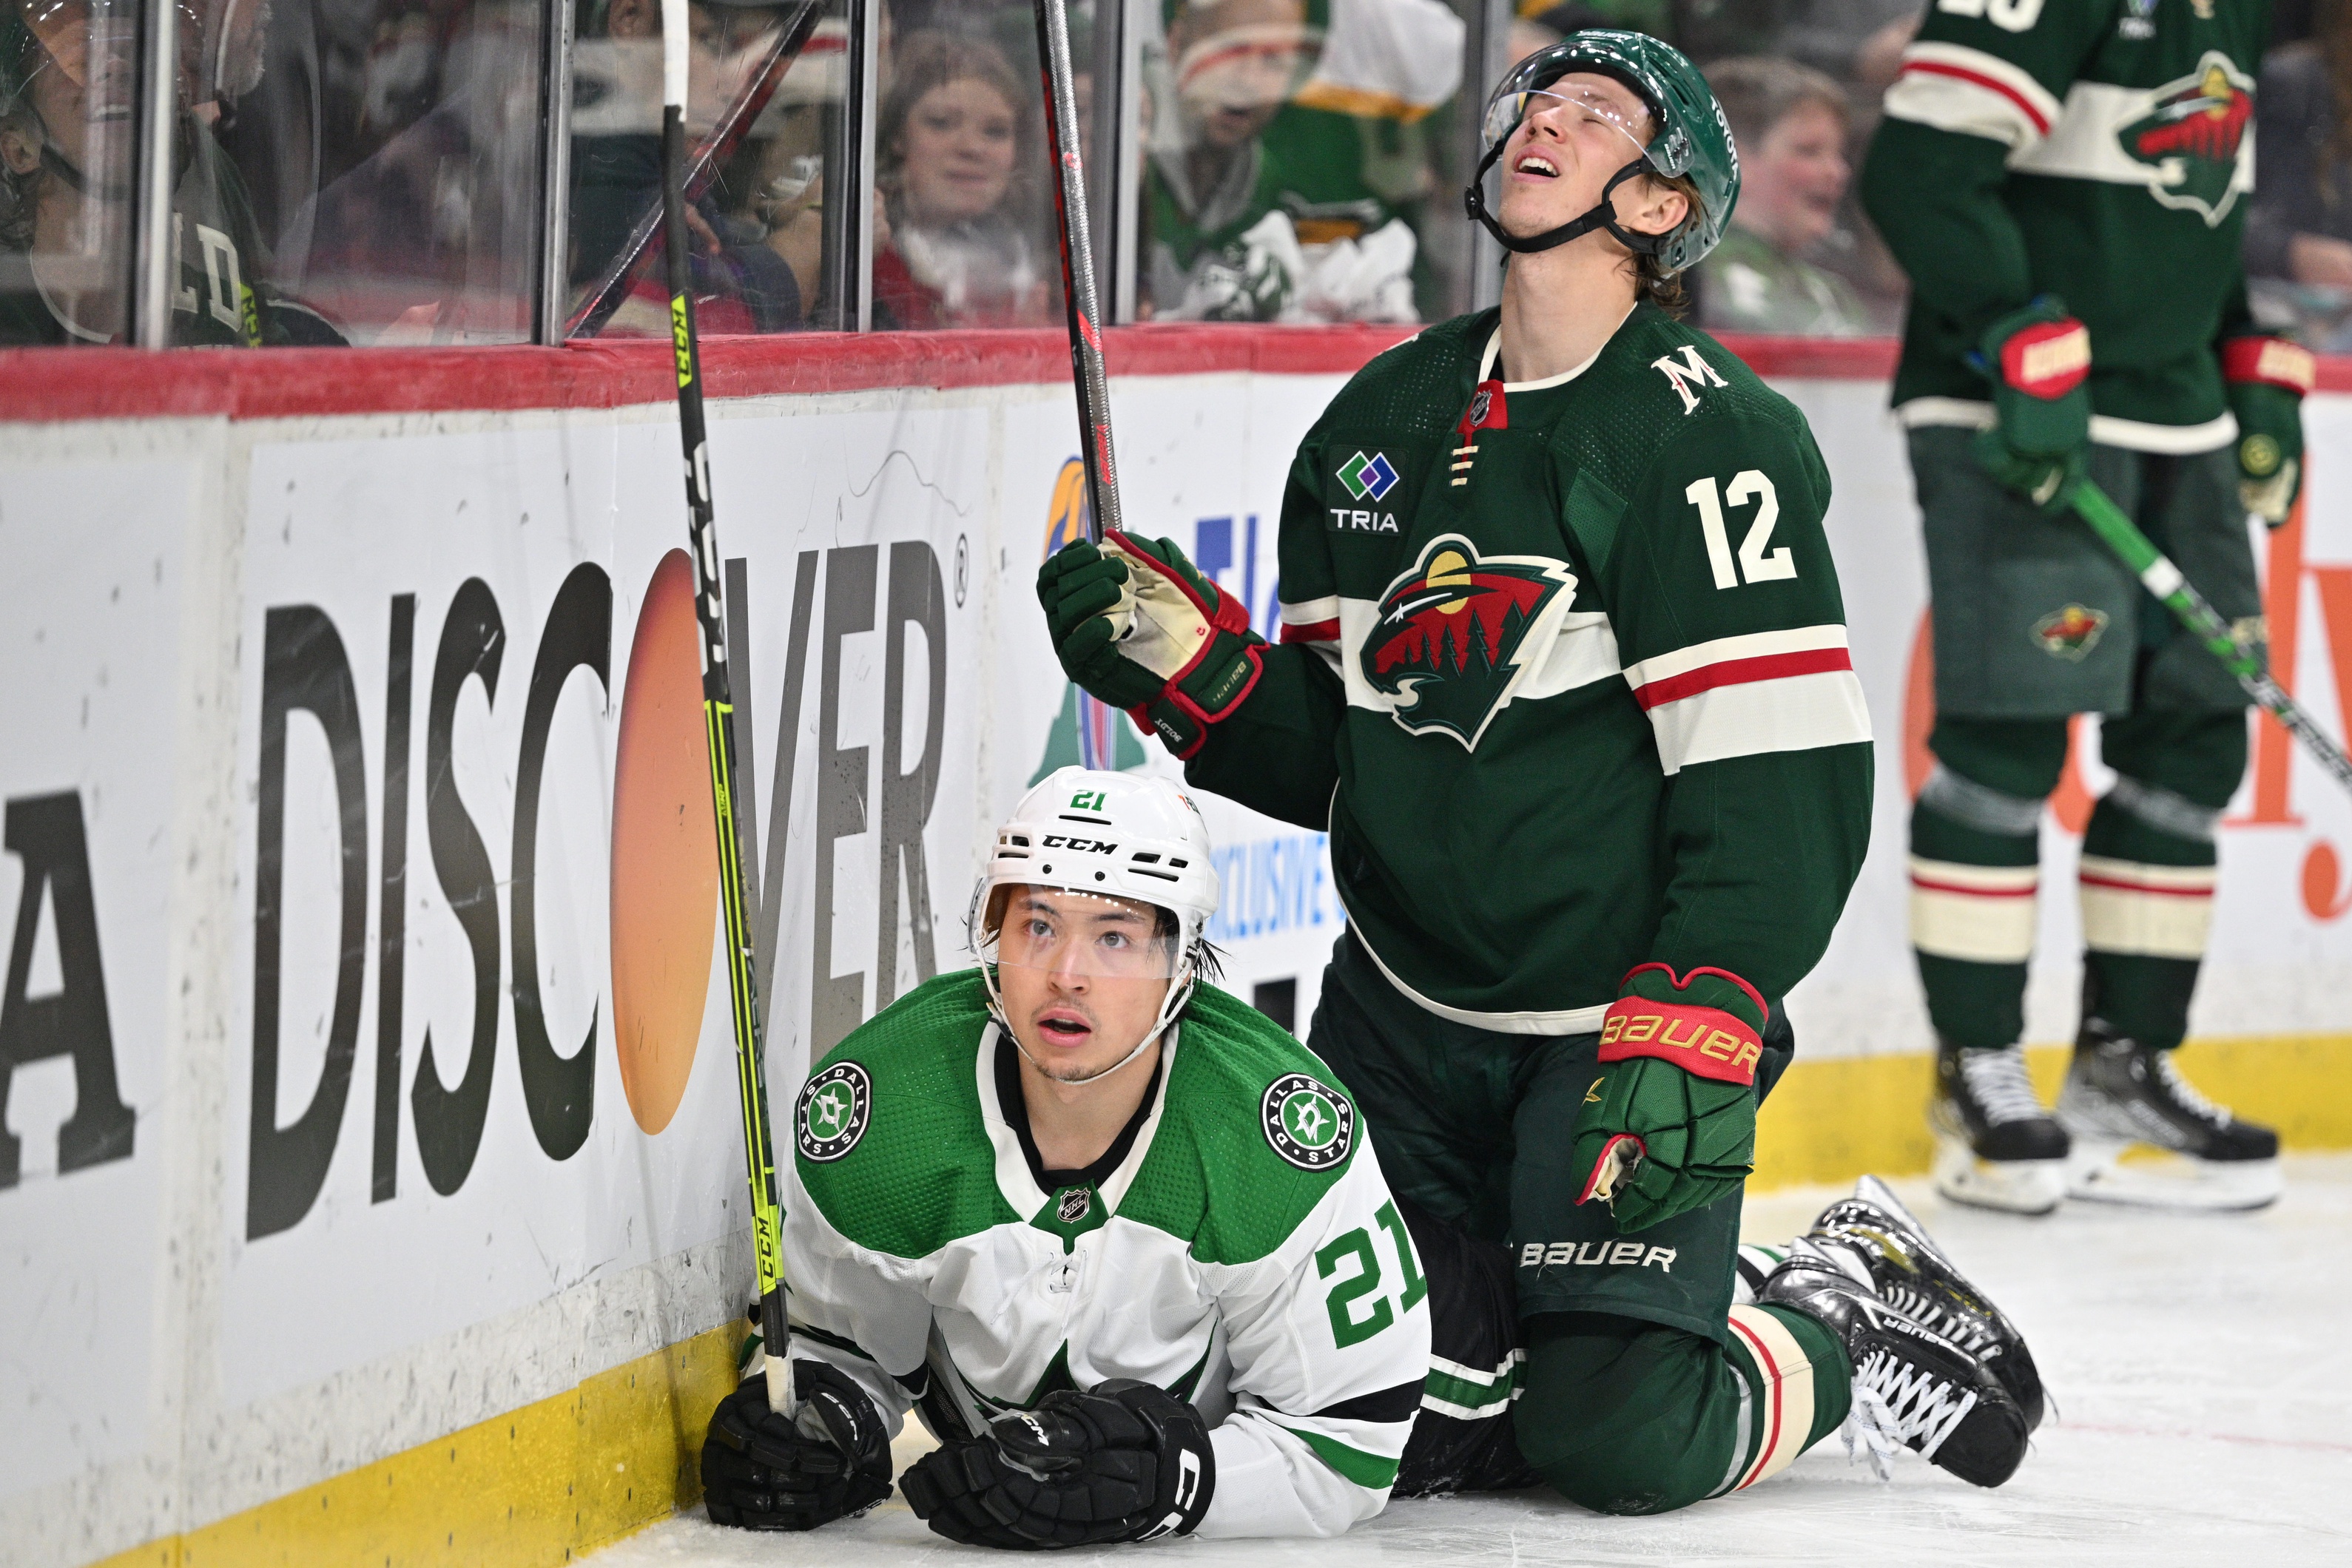 Dallas Stars to Minnesota Wild: 'I bet you think about me